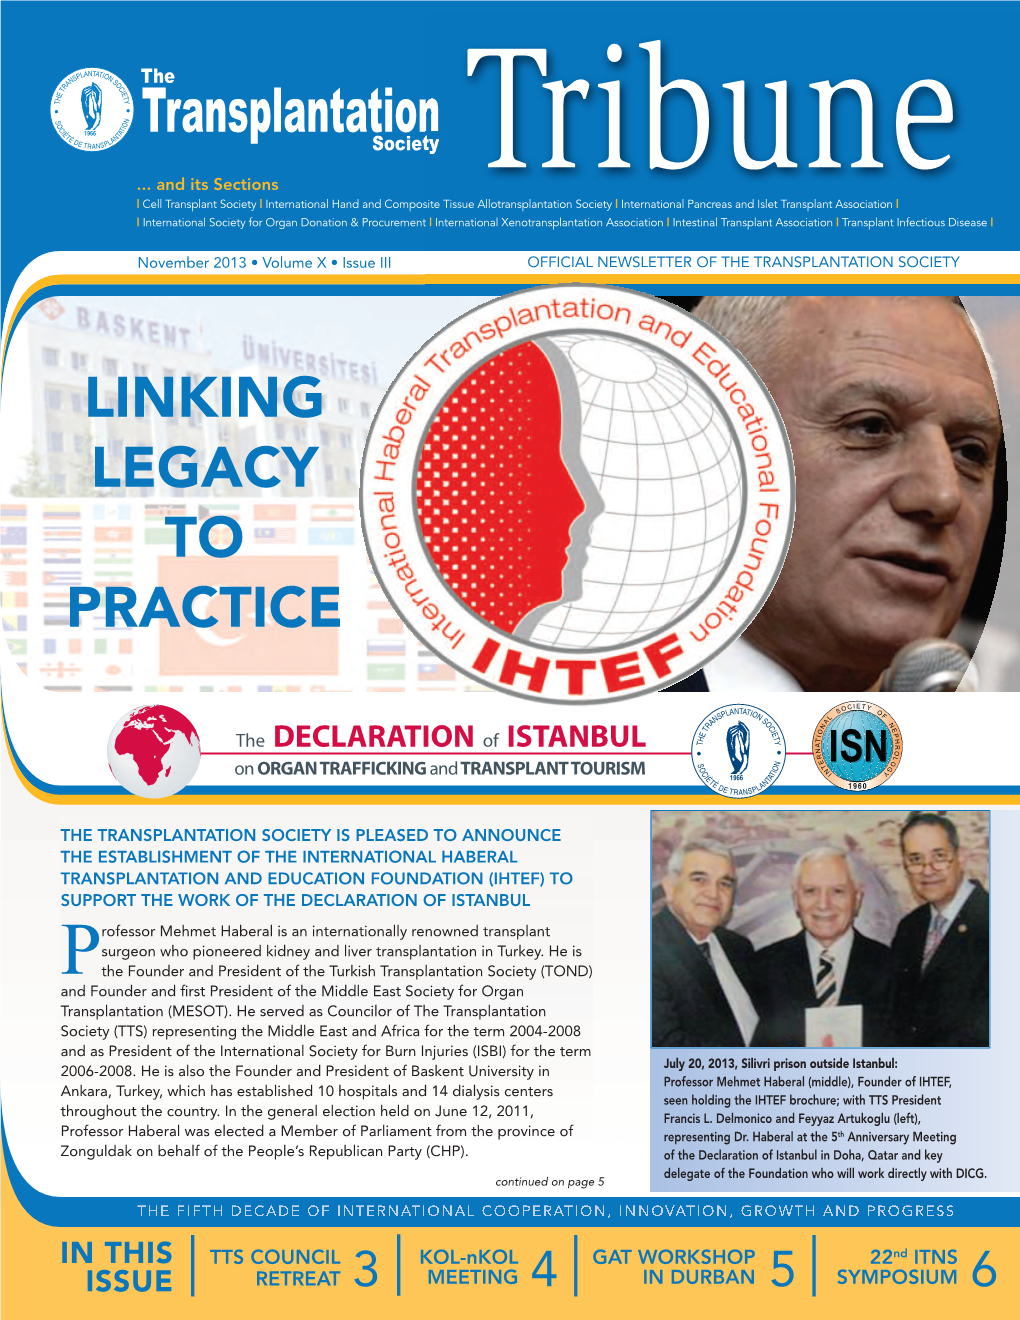 Linking Legacy to Practice